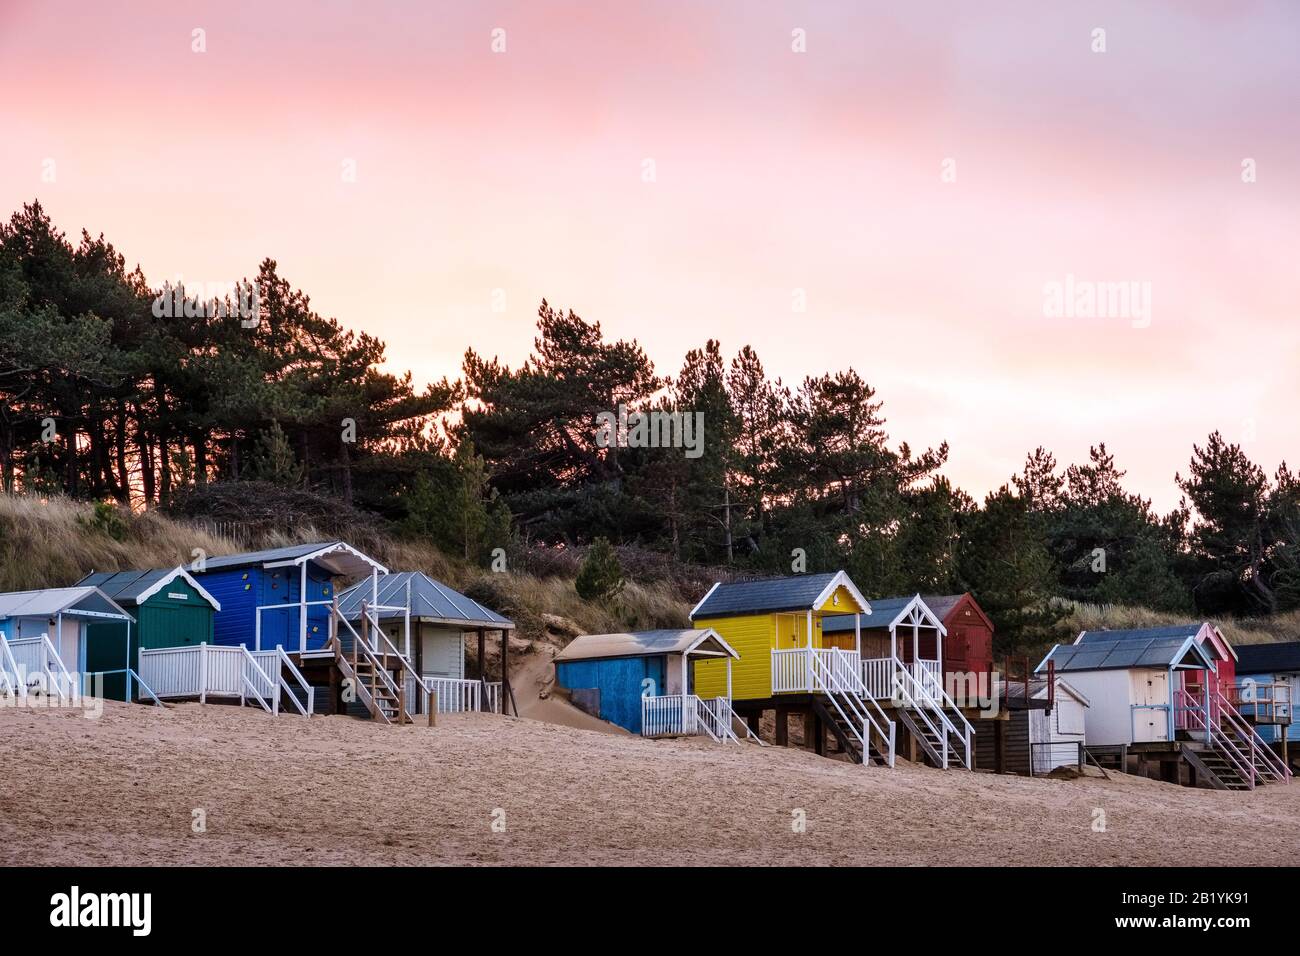 The iconic, brightly coloured beach huts on Wells beach, at sunset in winter, with the pine woods behind. Stock Photo